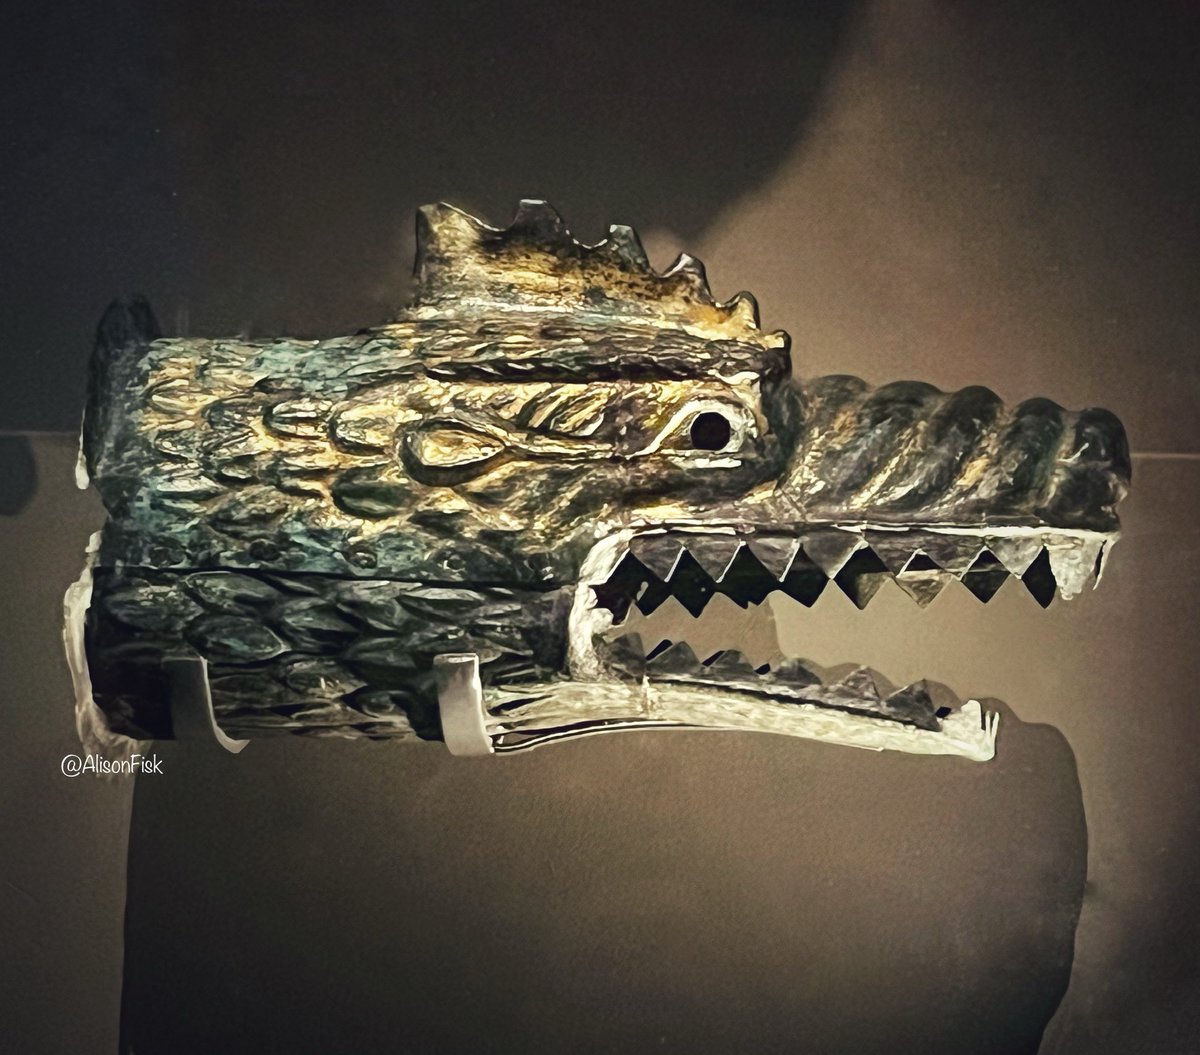 #RomanfortThursday

A fearsome Roman dragon head (draco). Copper alloy, AD 190-260. Part of a military standard which whistled eerily as the rider charged into battle! 

Here’s how it may have sounded: youtube.com/watch?v=xzZBJm…

Found at the Limes fortress of Niederbieber, Germany.